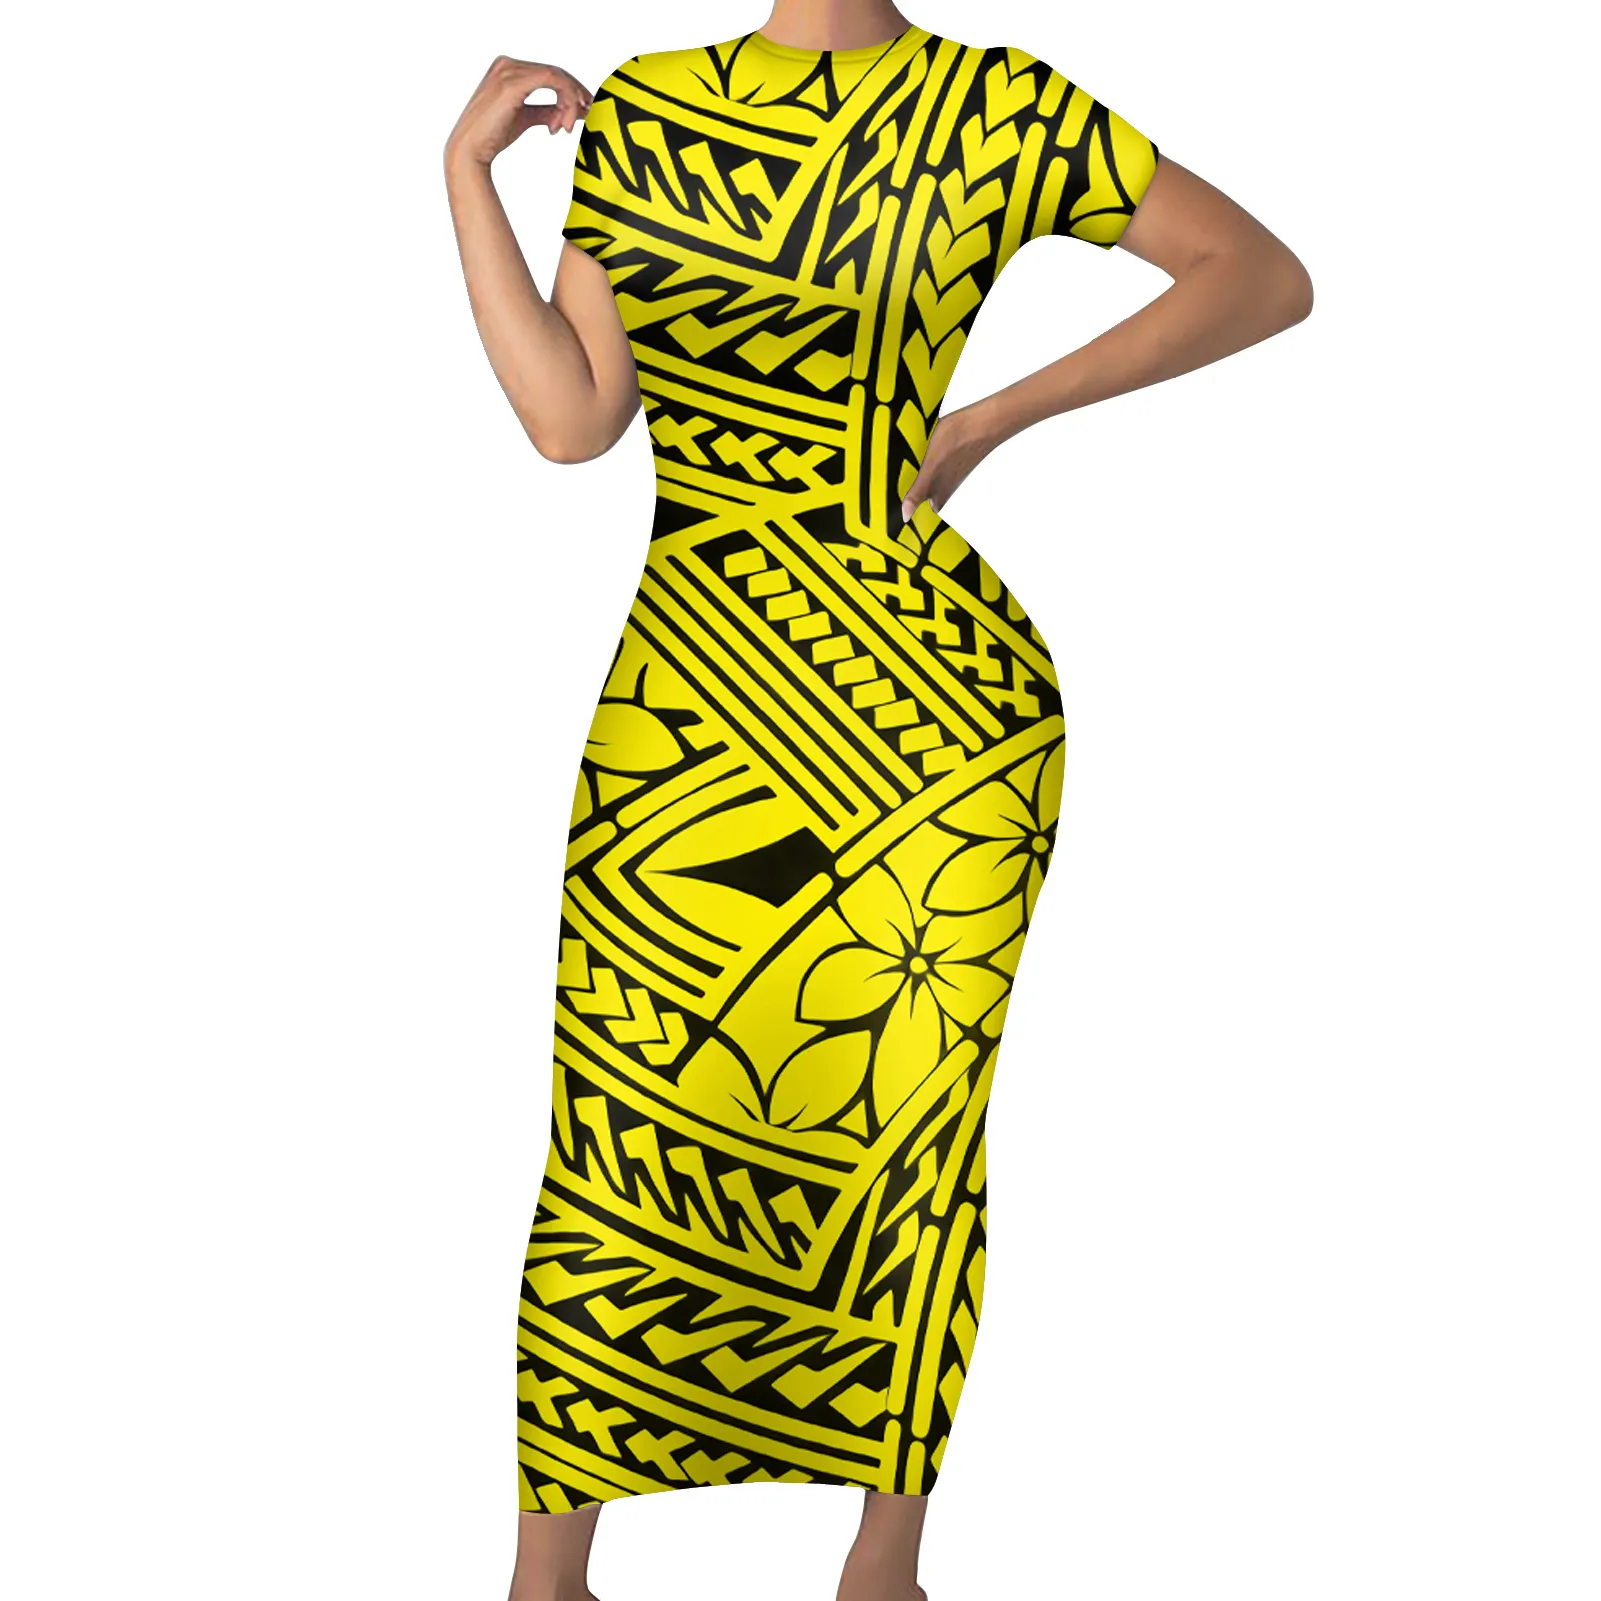 New arrival Polynesian Traditional Tribal Design Print Women's Dresses Colorful Clothing short Sleeve Party Elegant lady dress